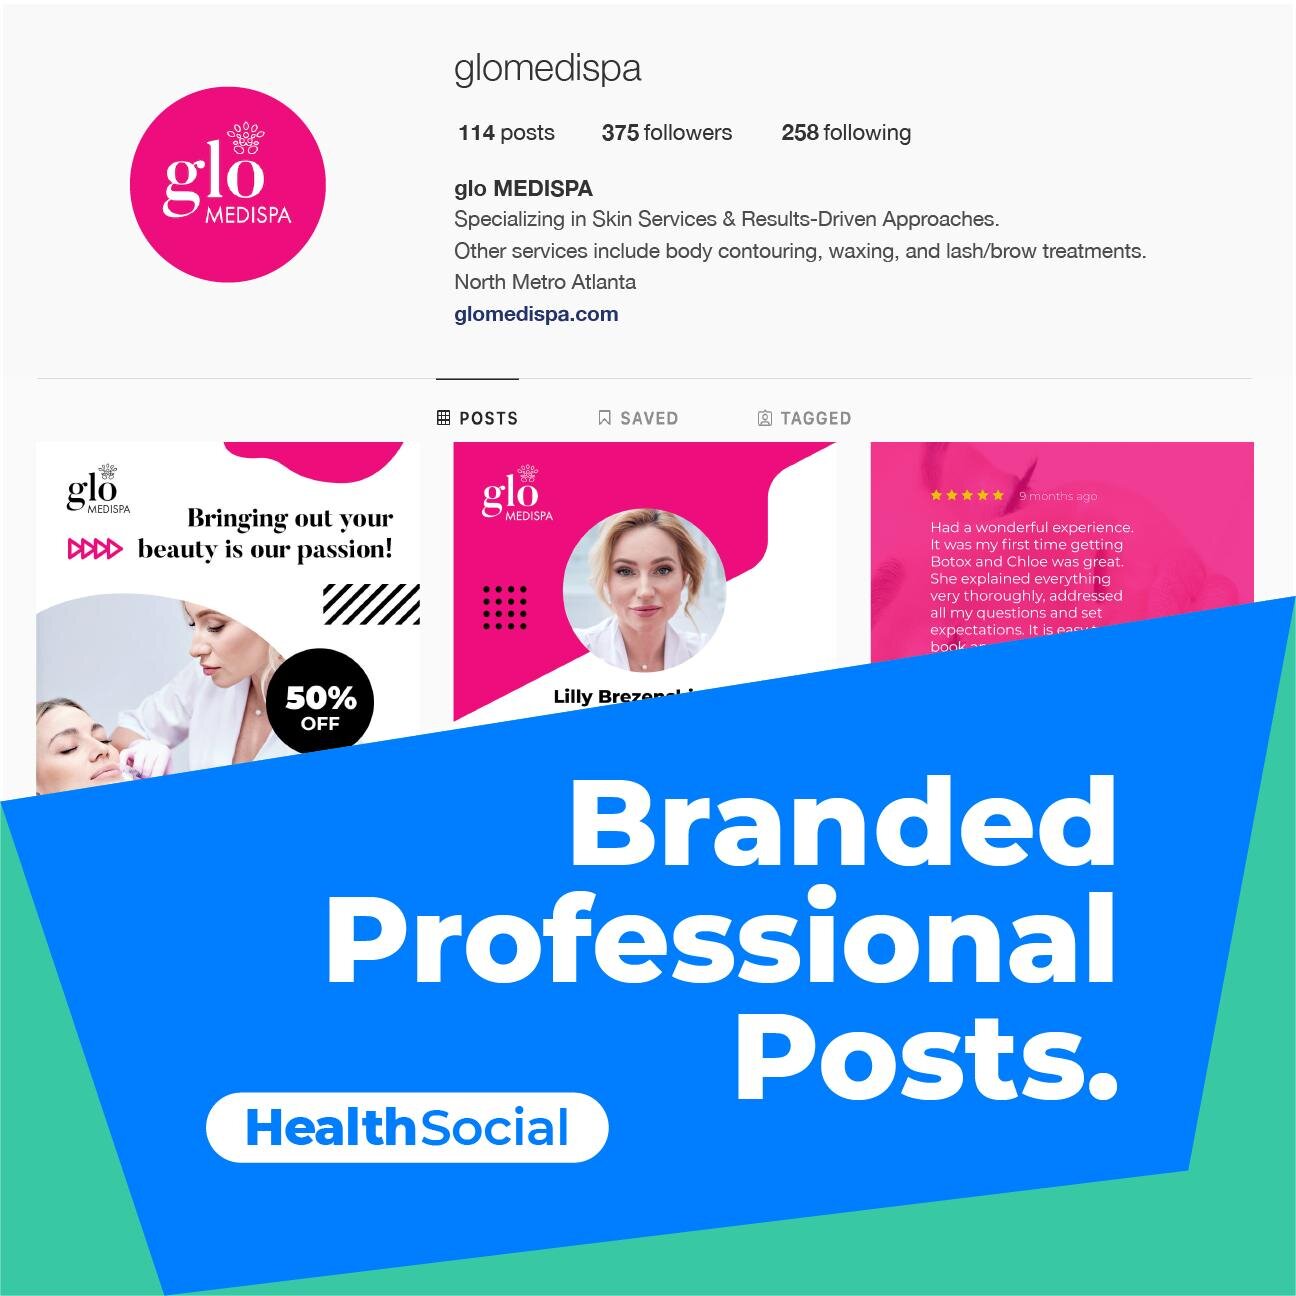 YOUR SOCIAL POSTS SHOULD GENUINELY INSPIRE TRUST!

If you are a healthcare provider or professional, don't lose another potential patient to mediocre social media.

We can elevate your brand presence with professionally-crafted, reputation-building c